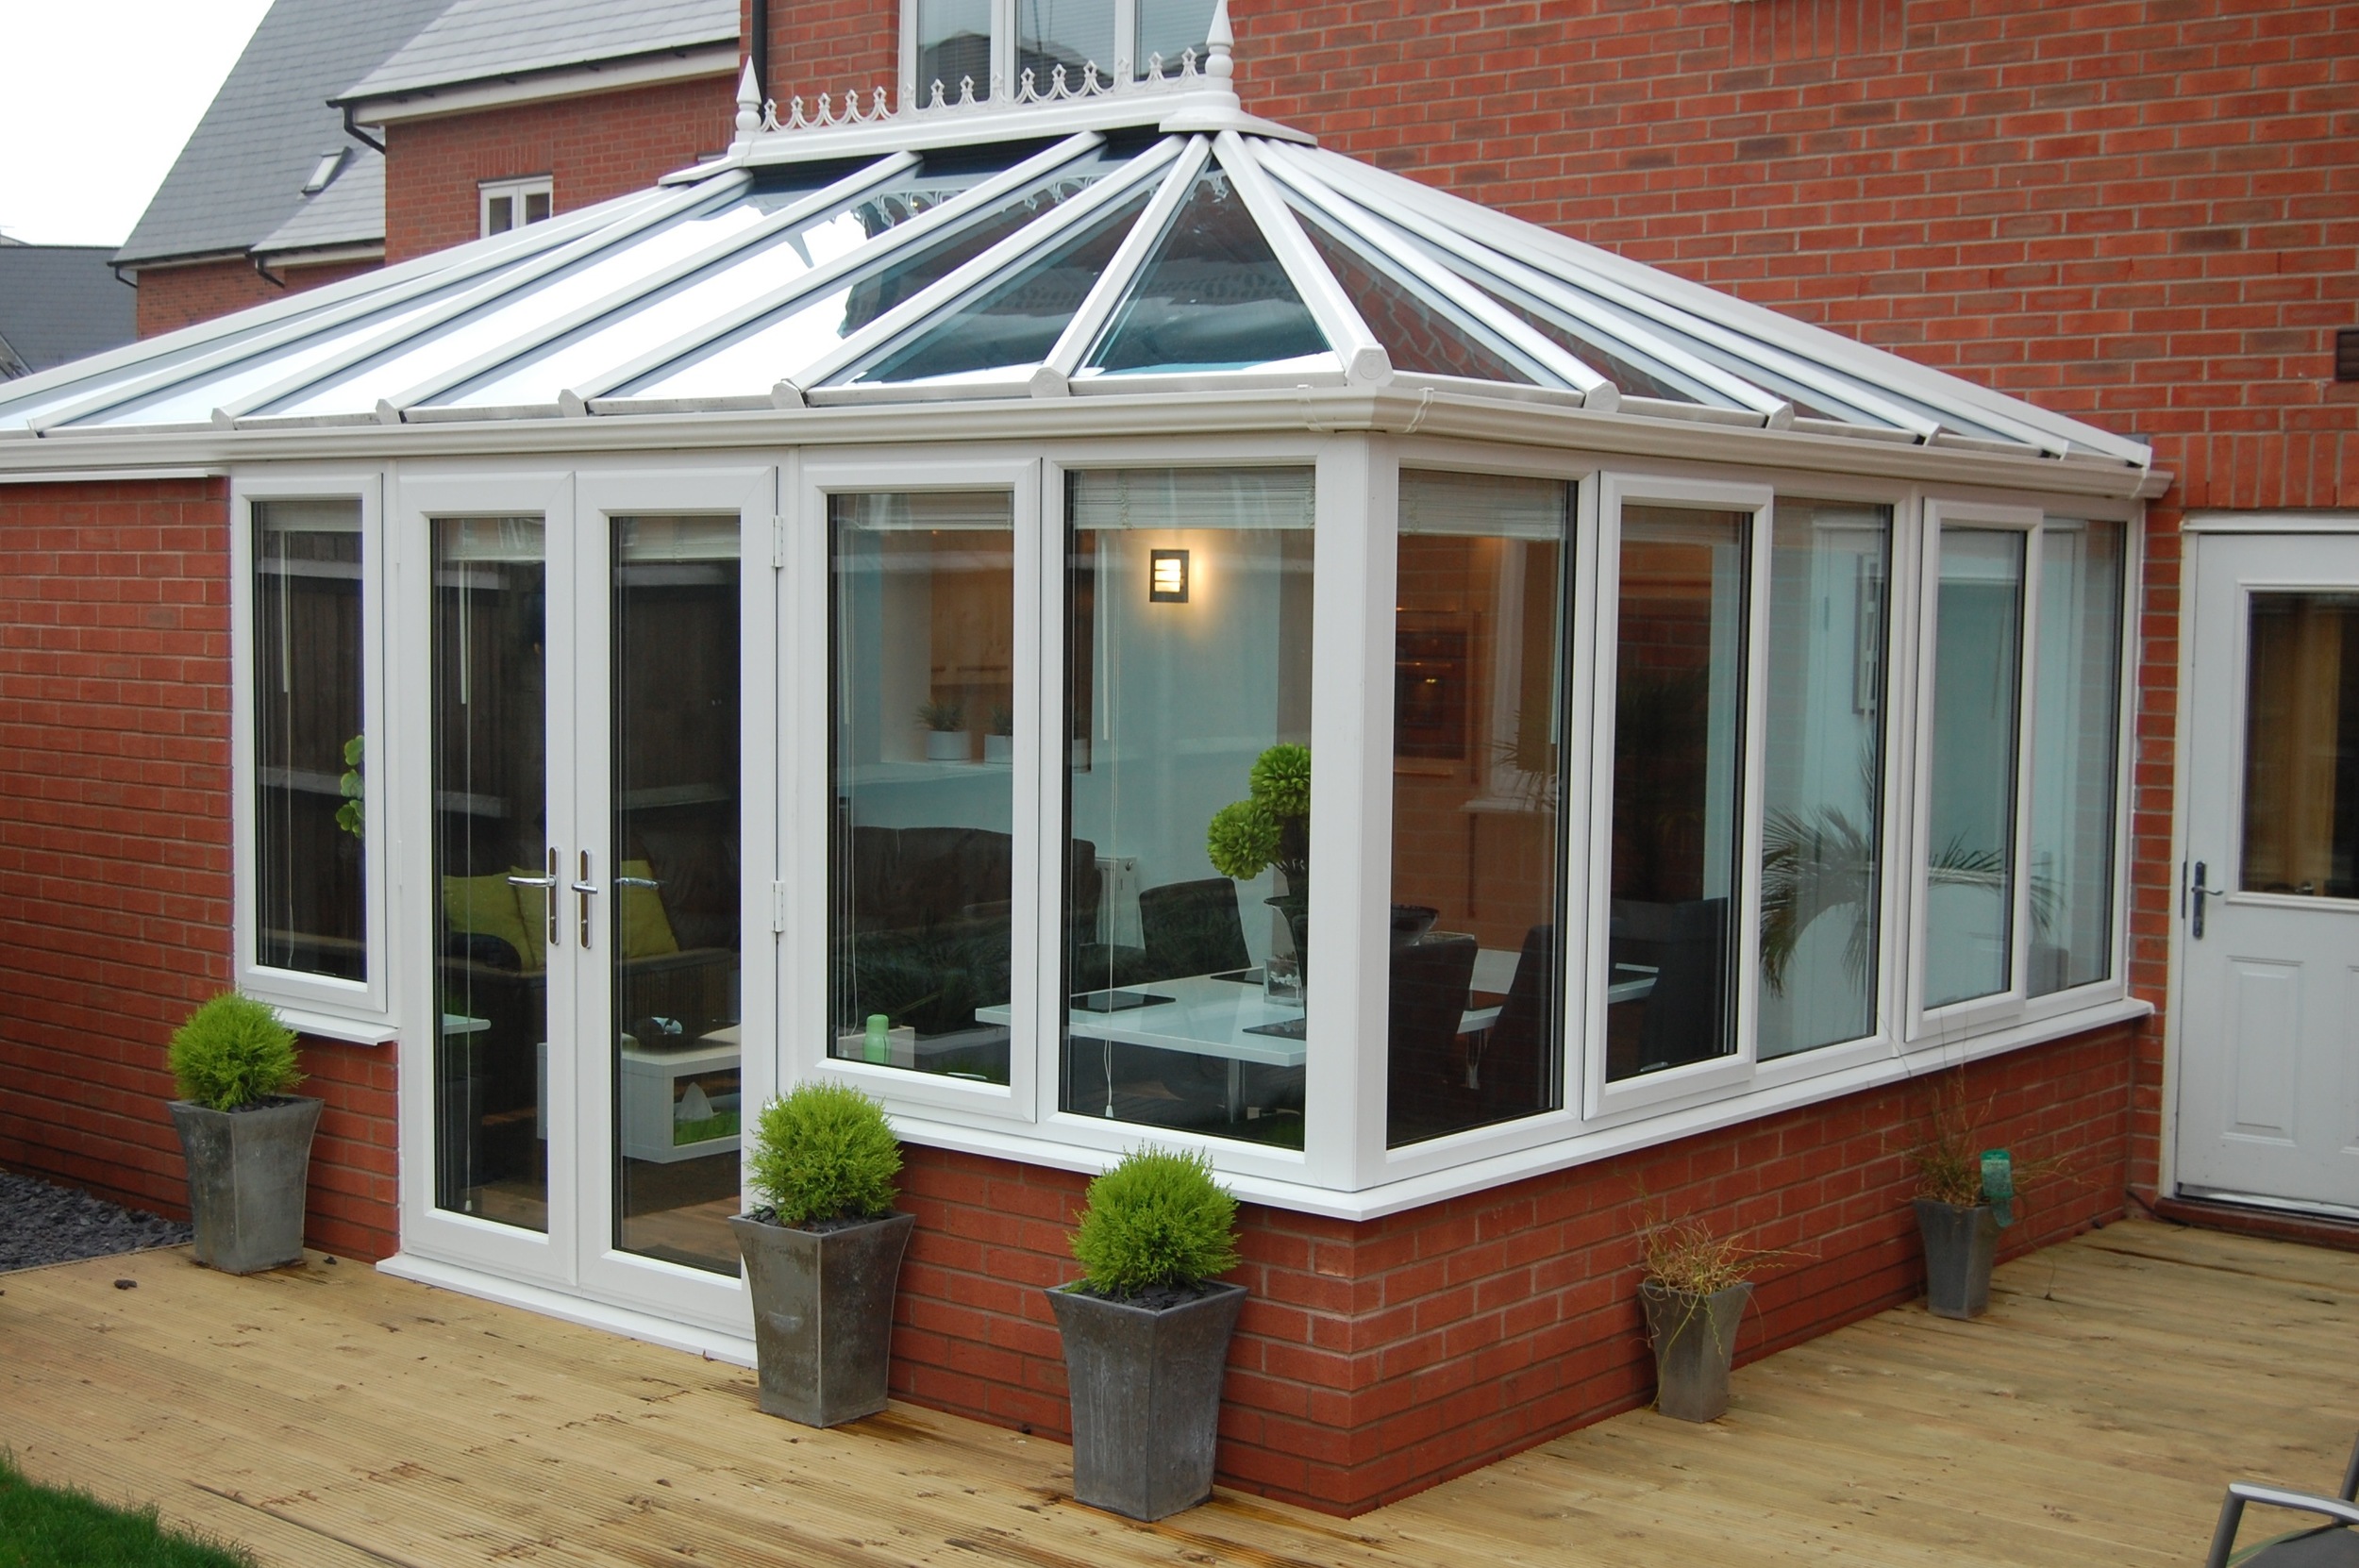  Conservatory cleaning   REQUEST A QUOTATION  